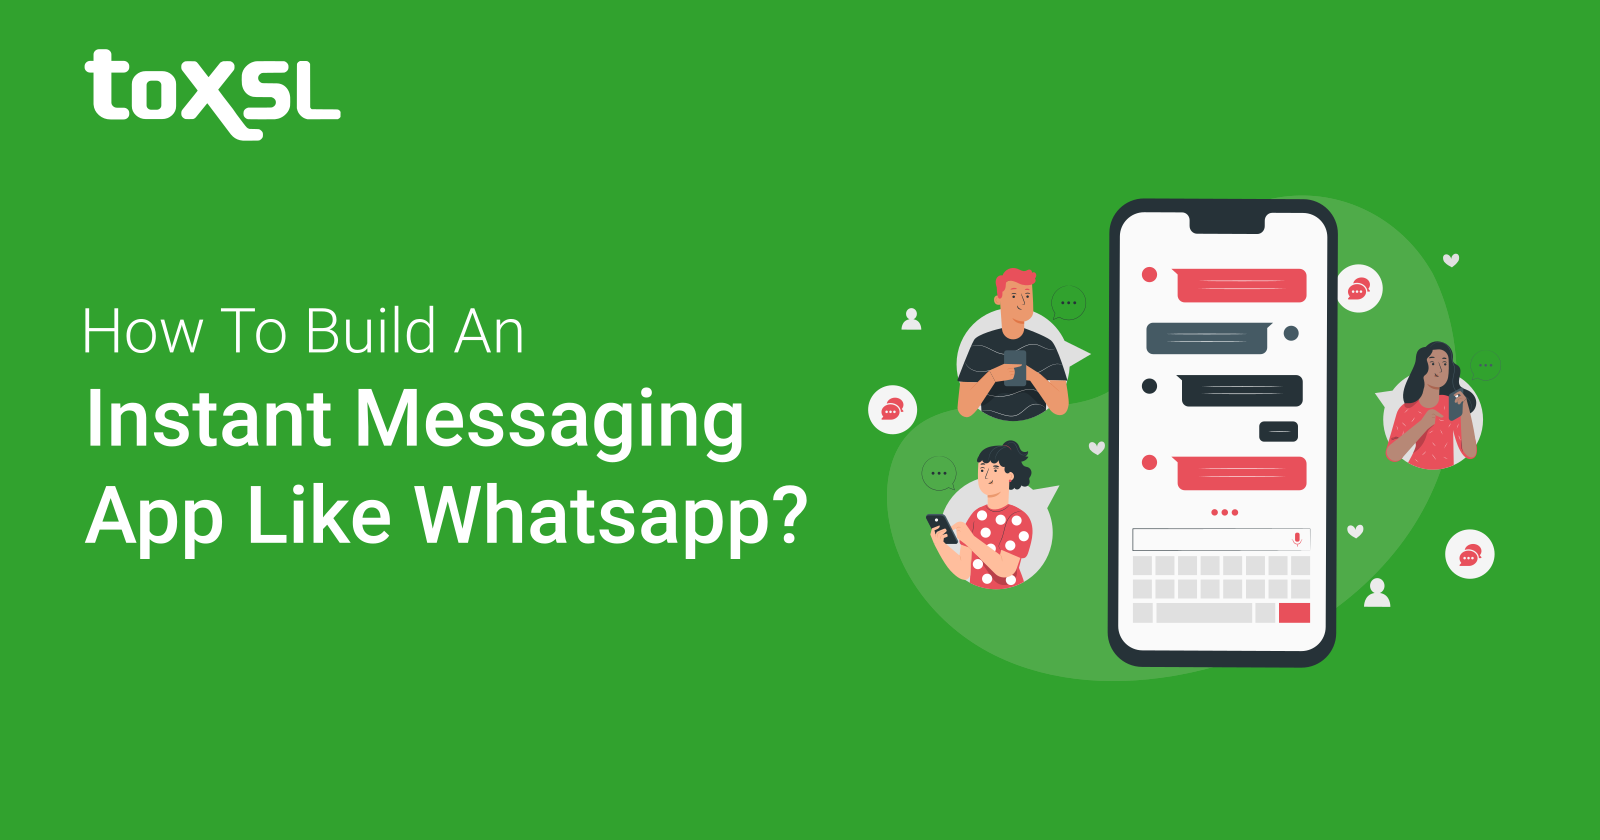 How To Build An Instant Messaging App Like Whatsapp?